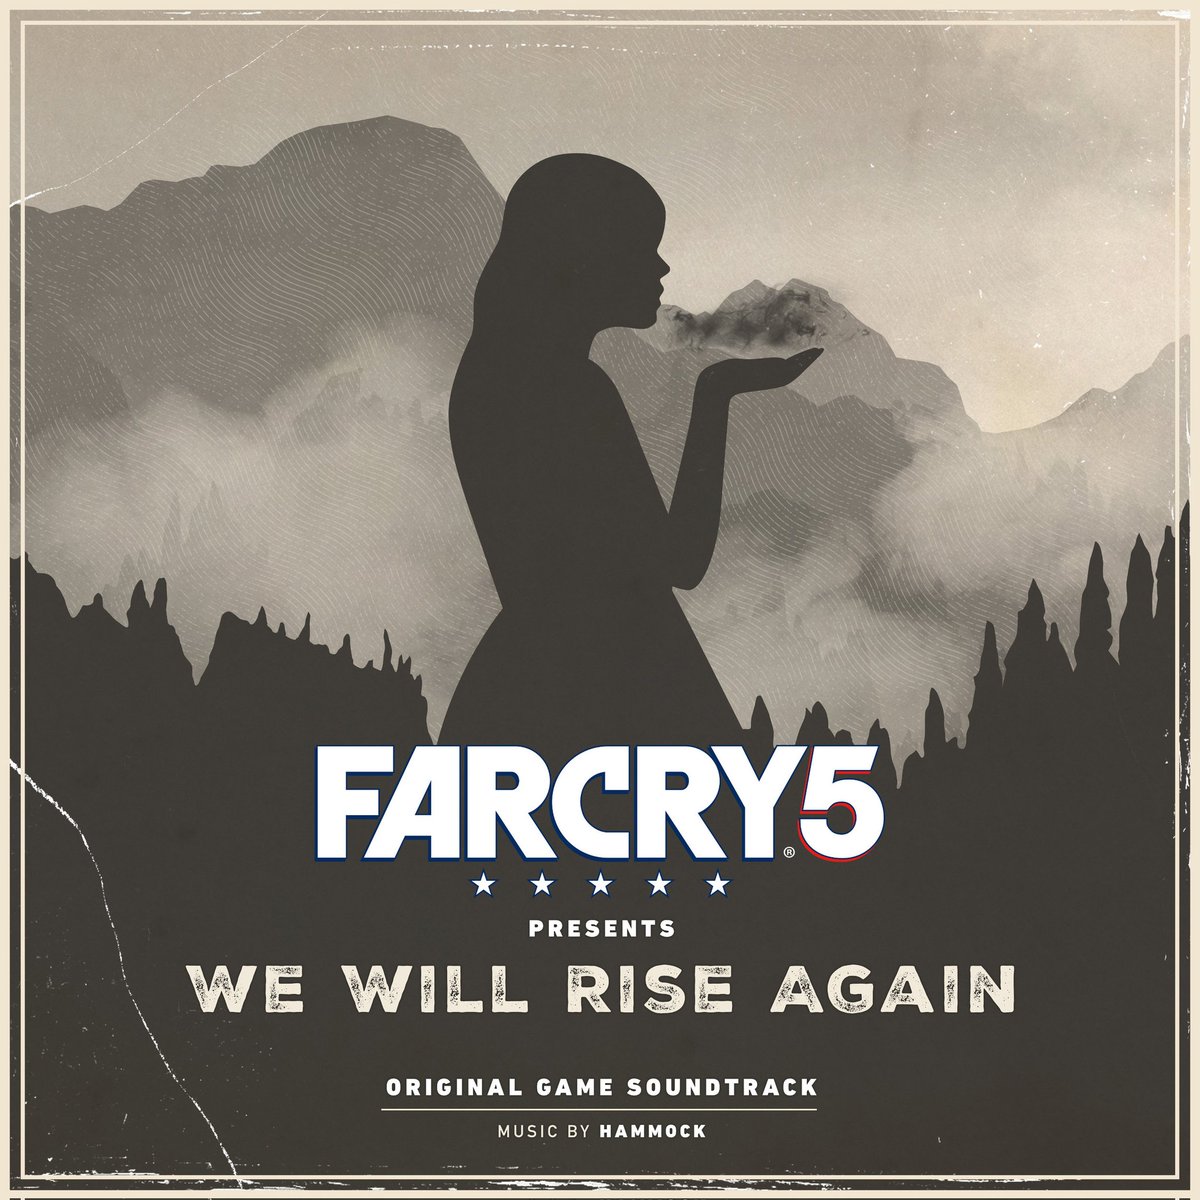 The #FarCry5 soundtrack is still goated.